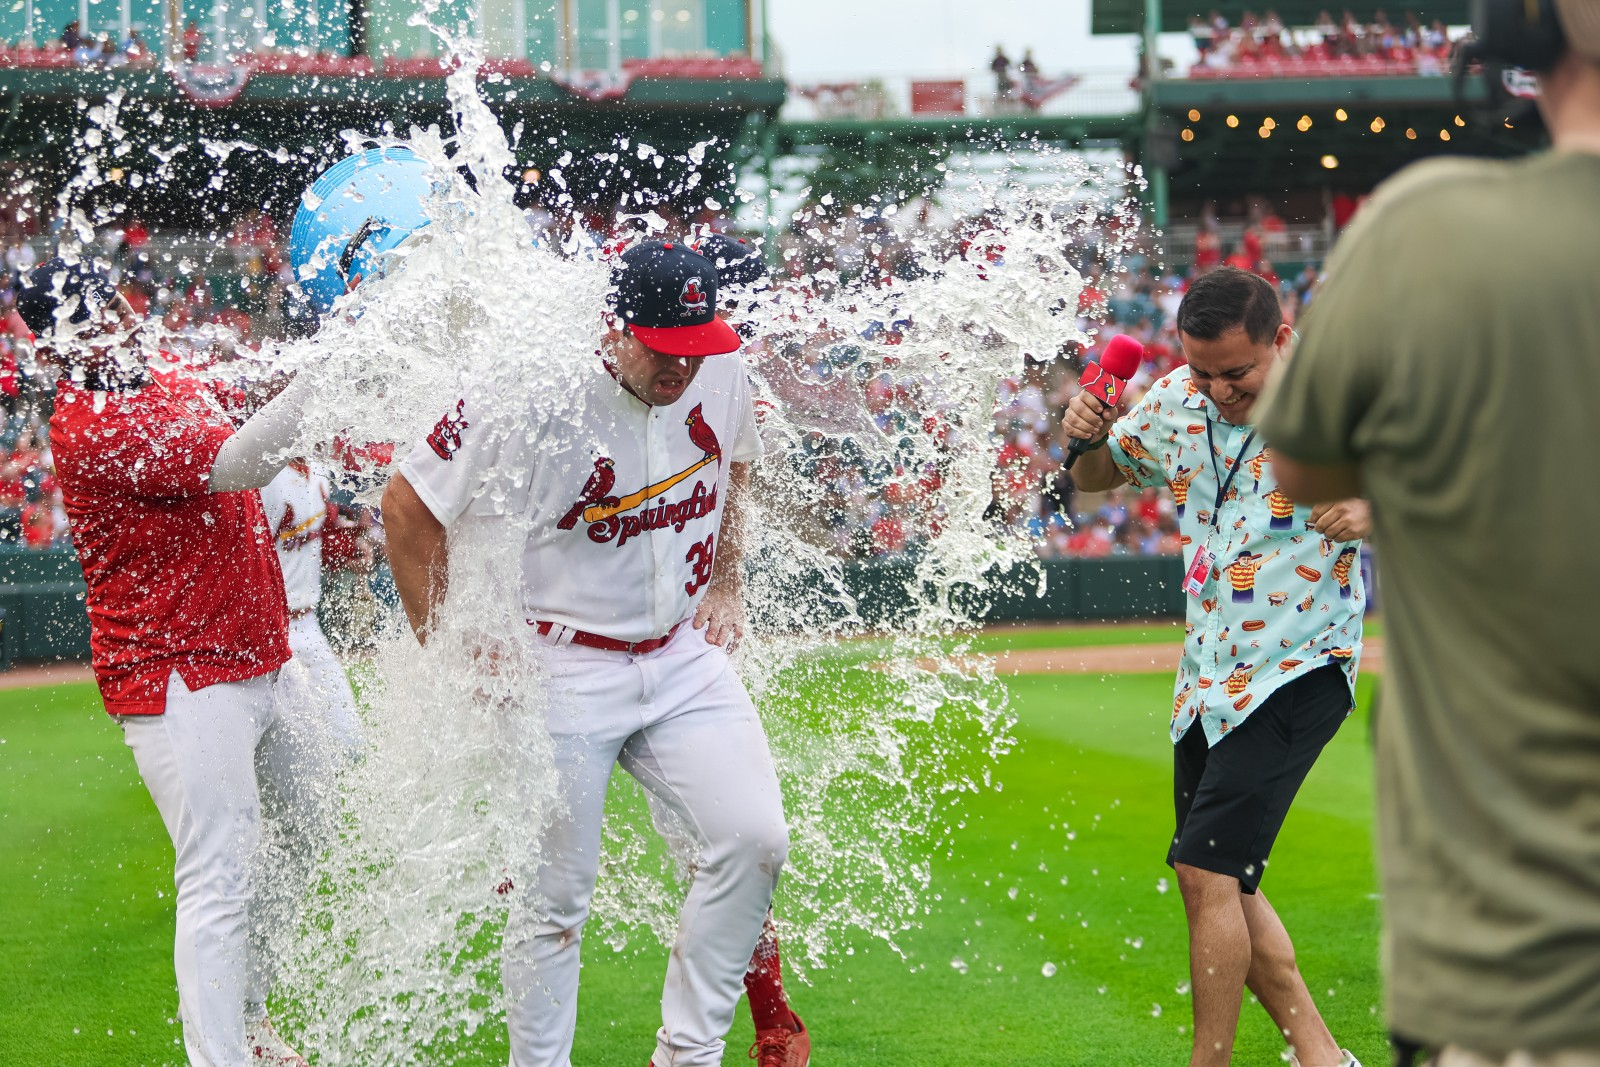 Springfield Cardinals pitcher Max Rajcic is doused by his teammates with cold water after a game at Hammons Field.